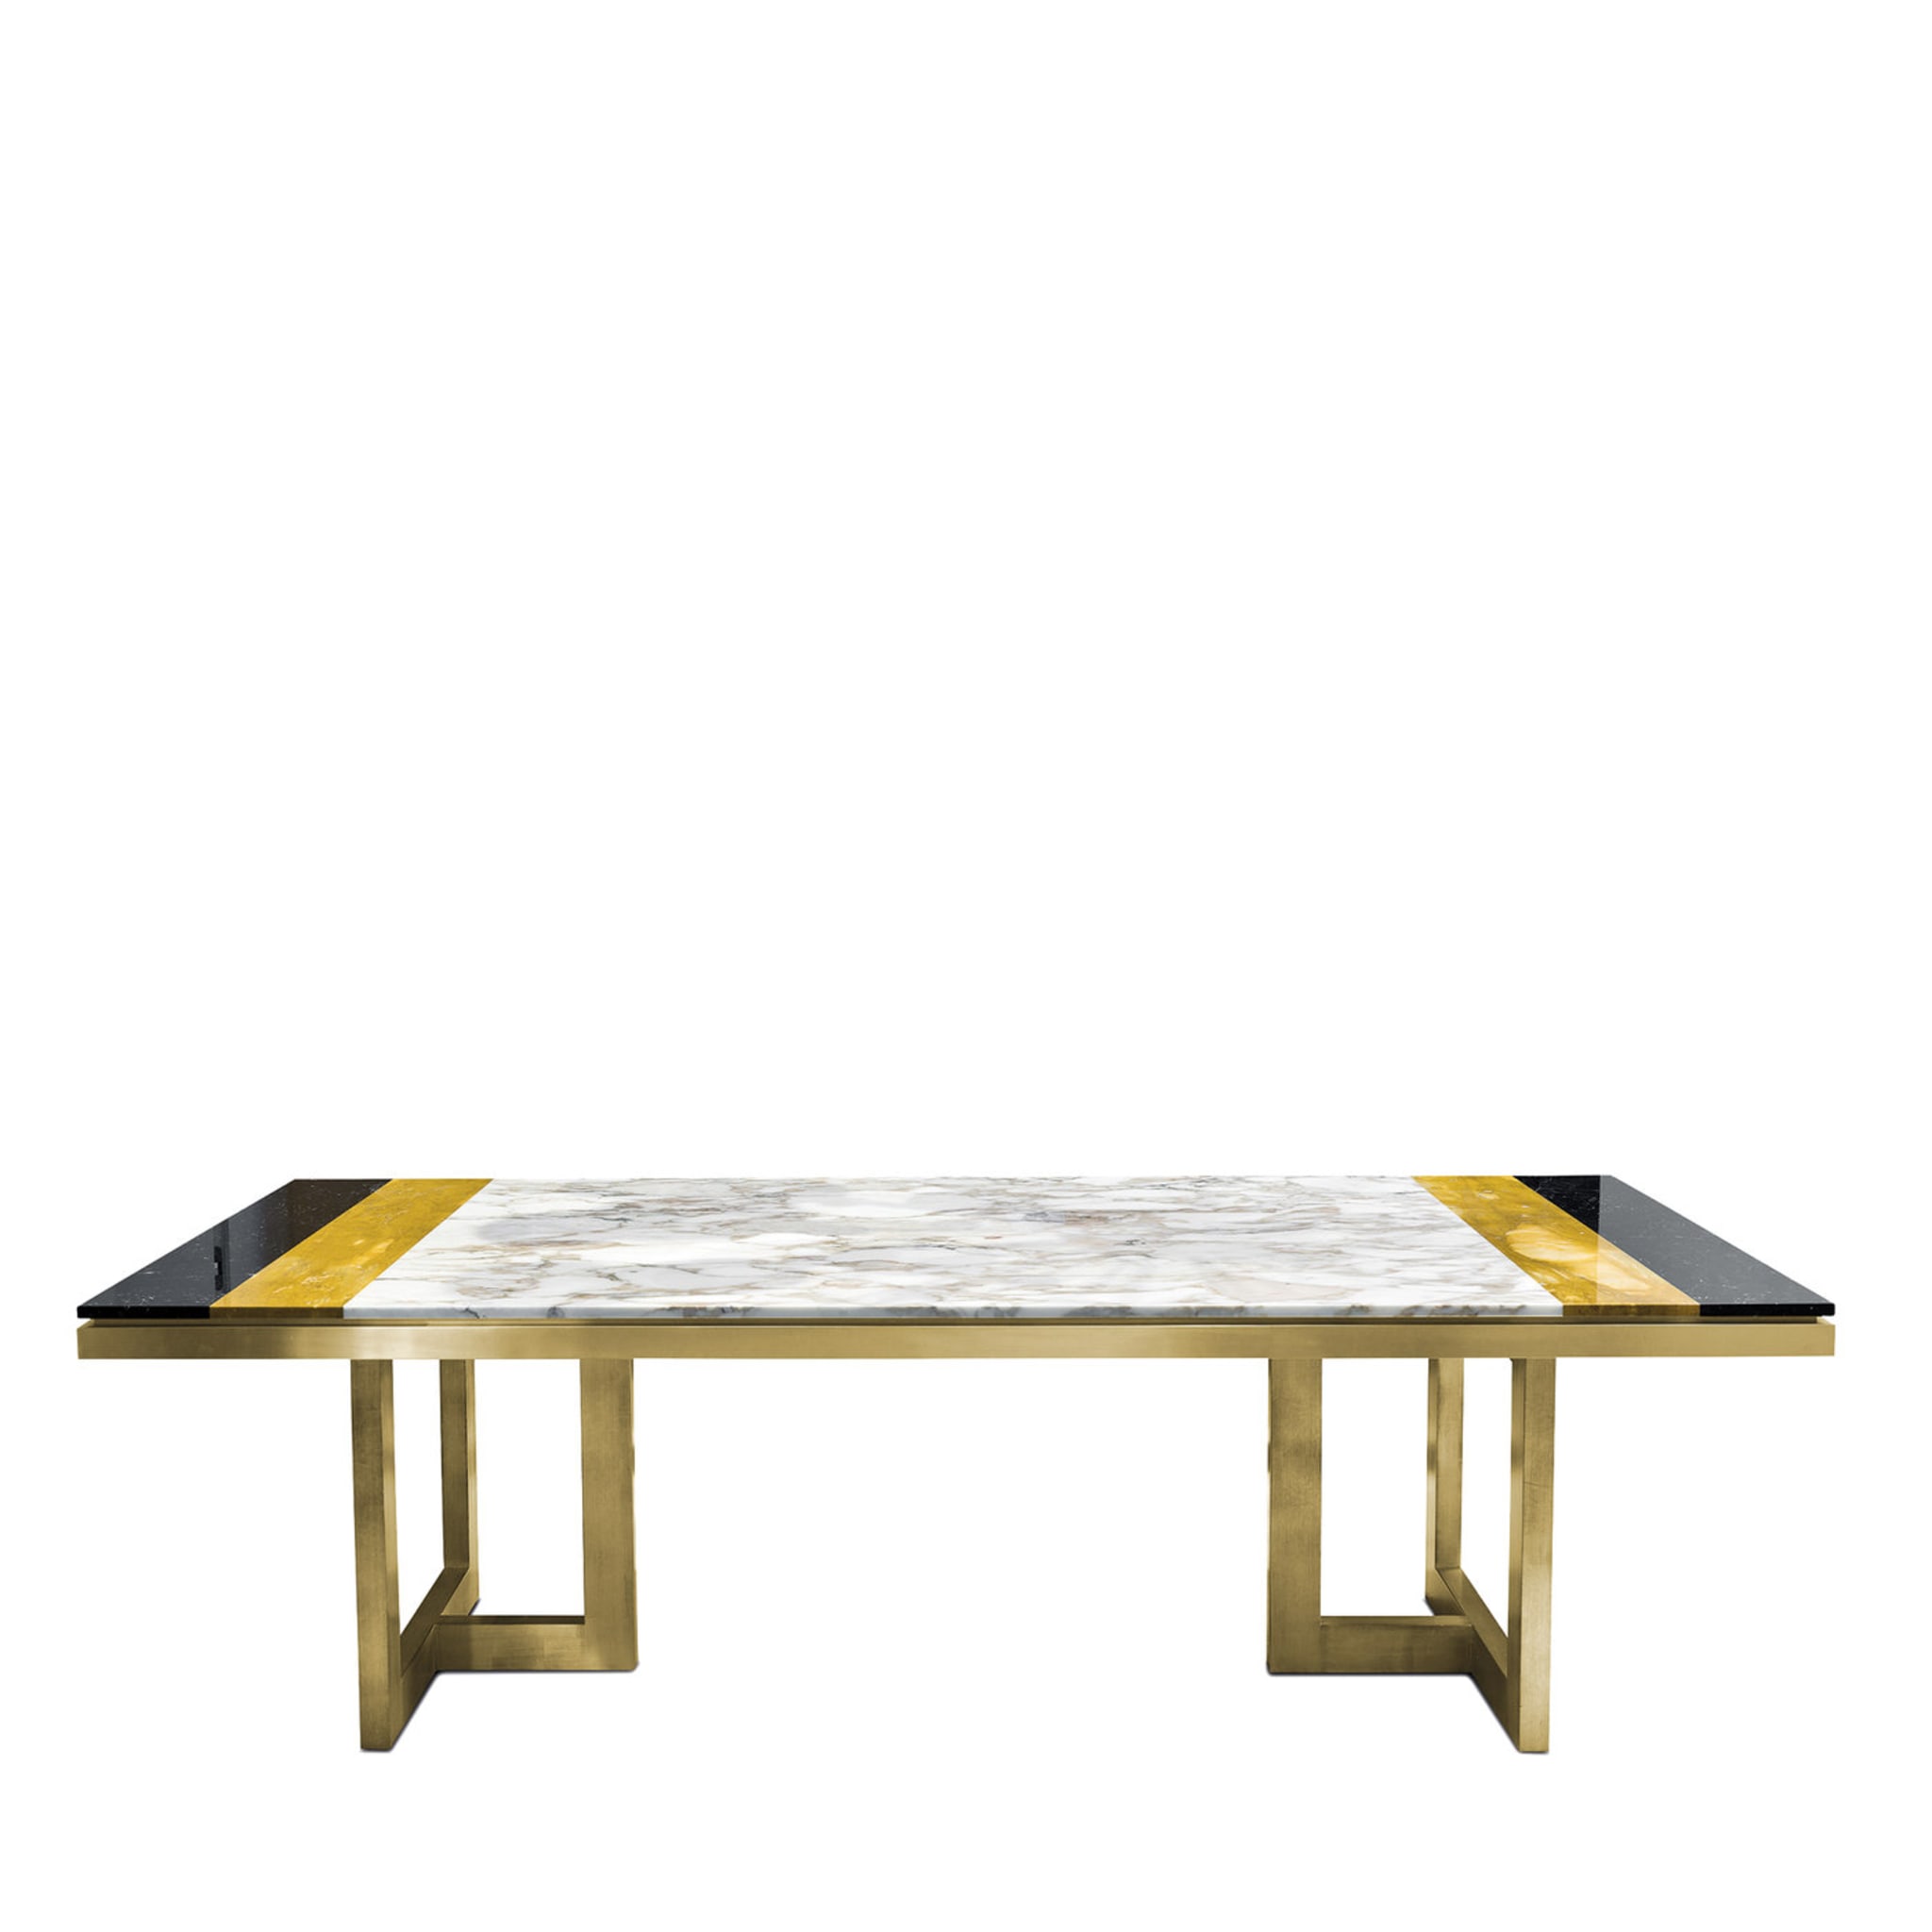 Otello Table in Calacatta and Marquina Marbles - Main view